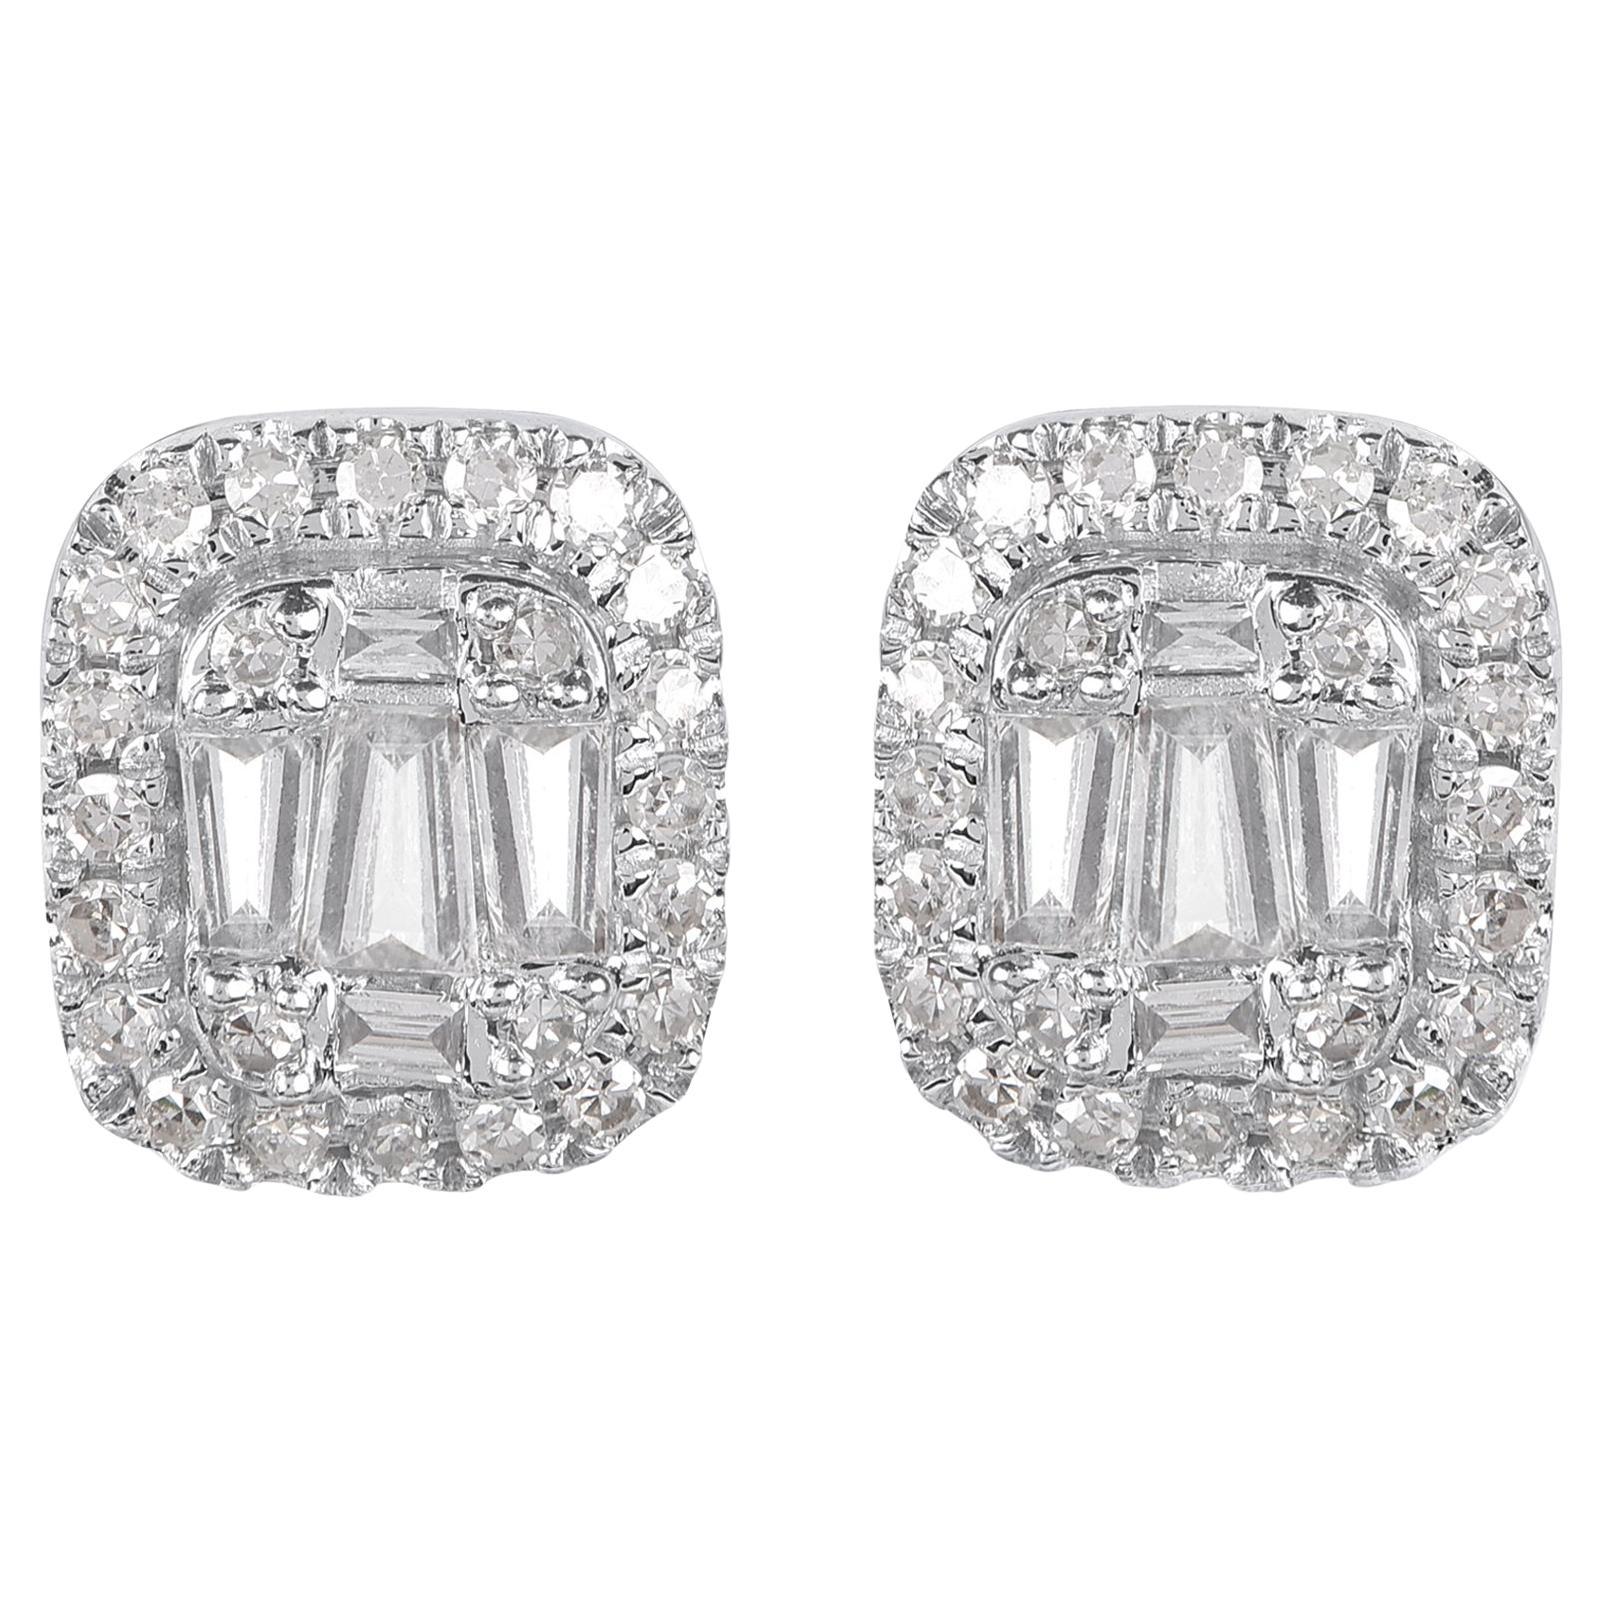 TJD 0.25 Carat Round & Baguette Diamond 14KT White Gold Halo Stud Earrings For Sale